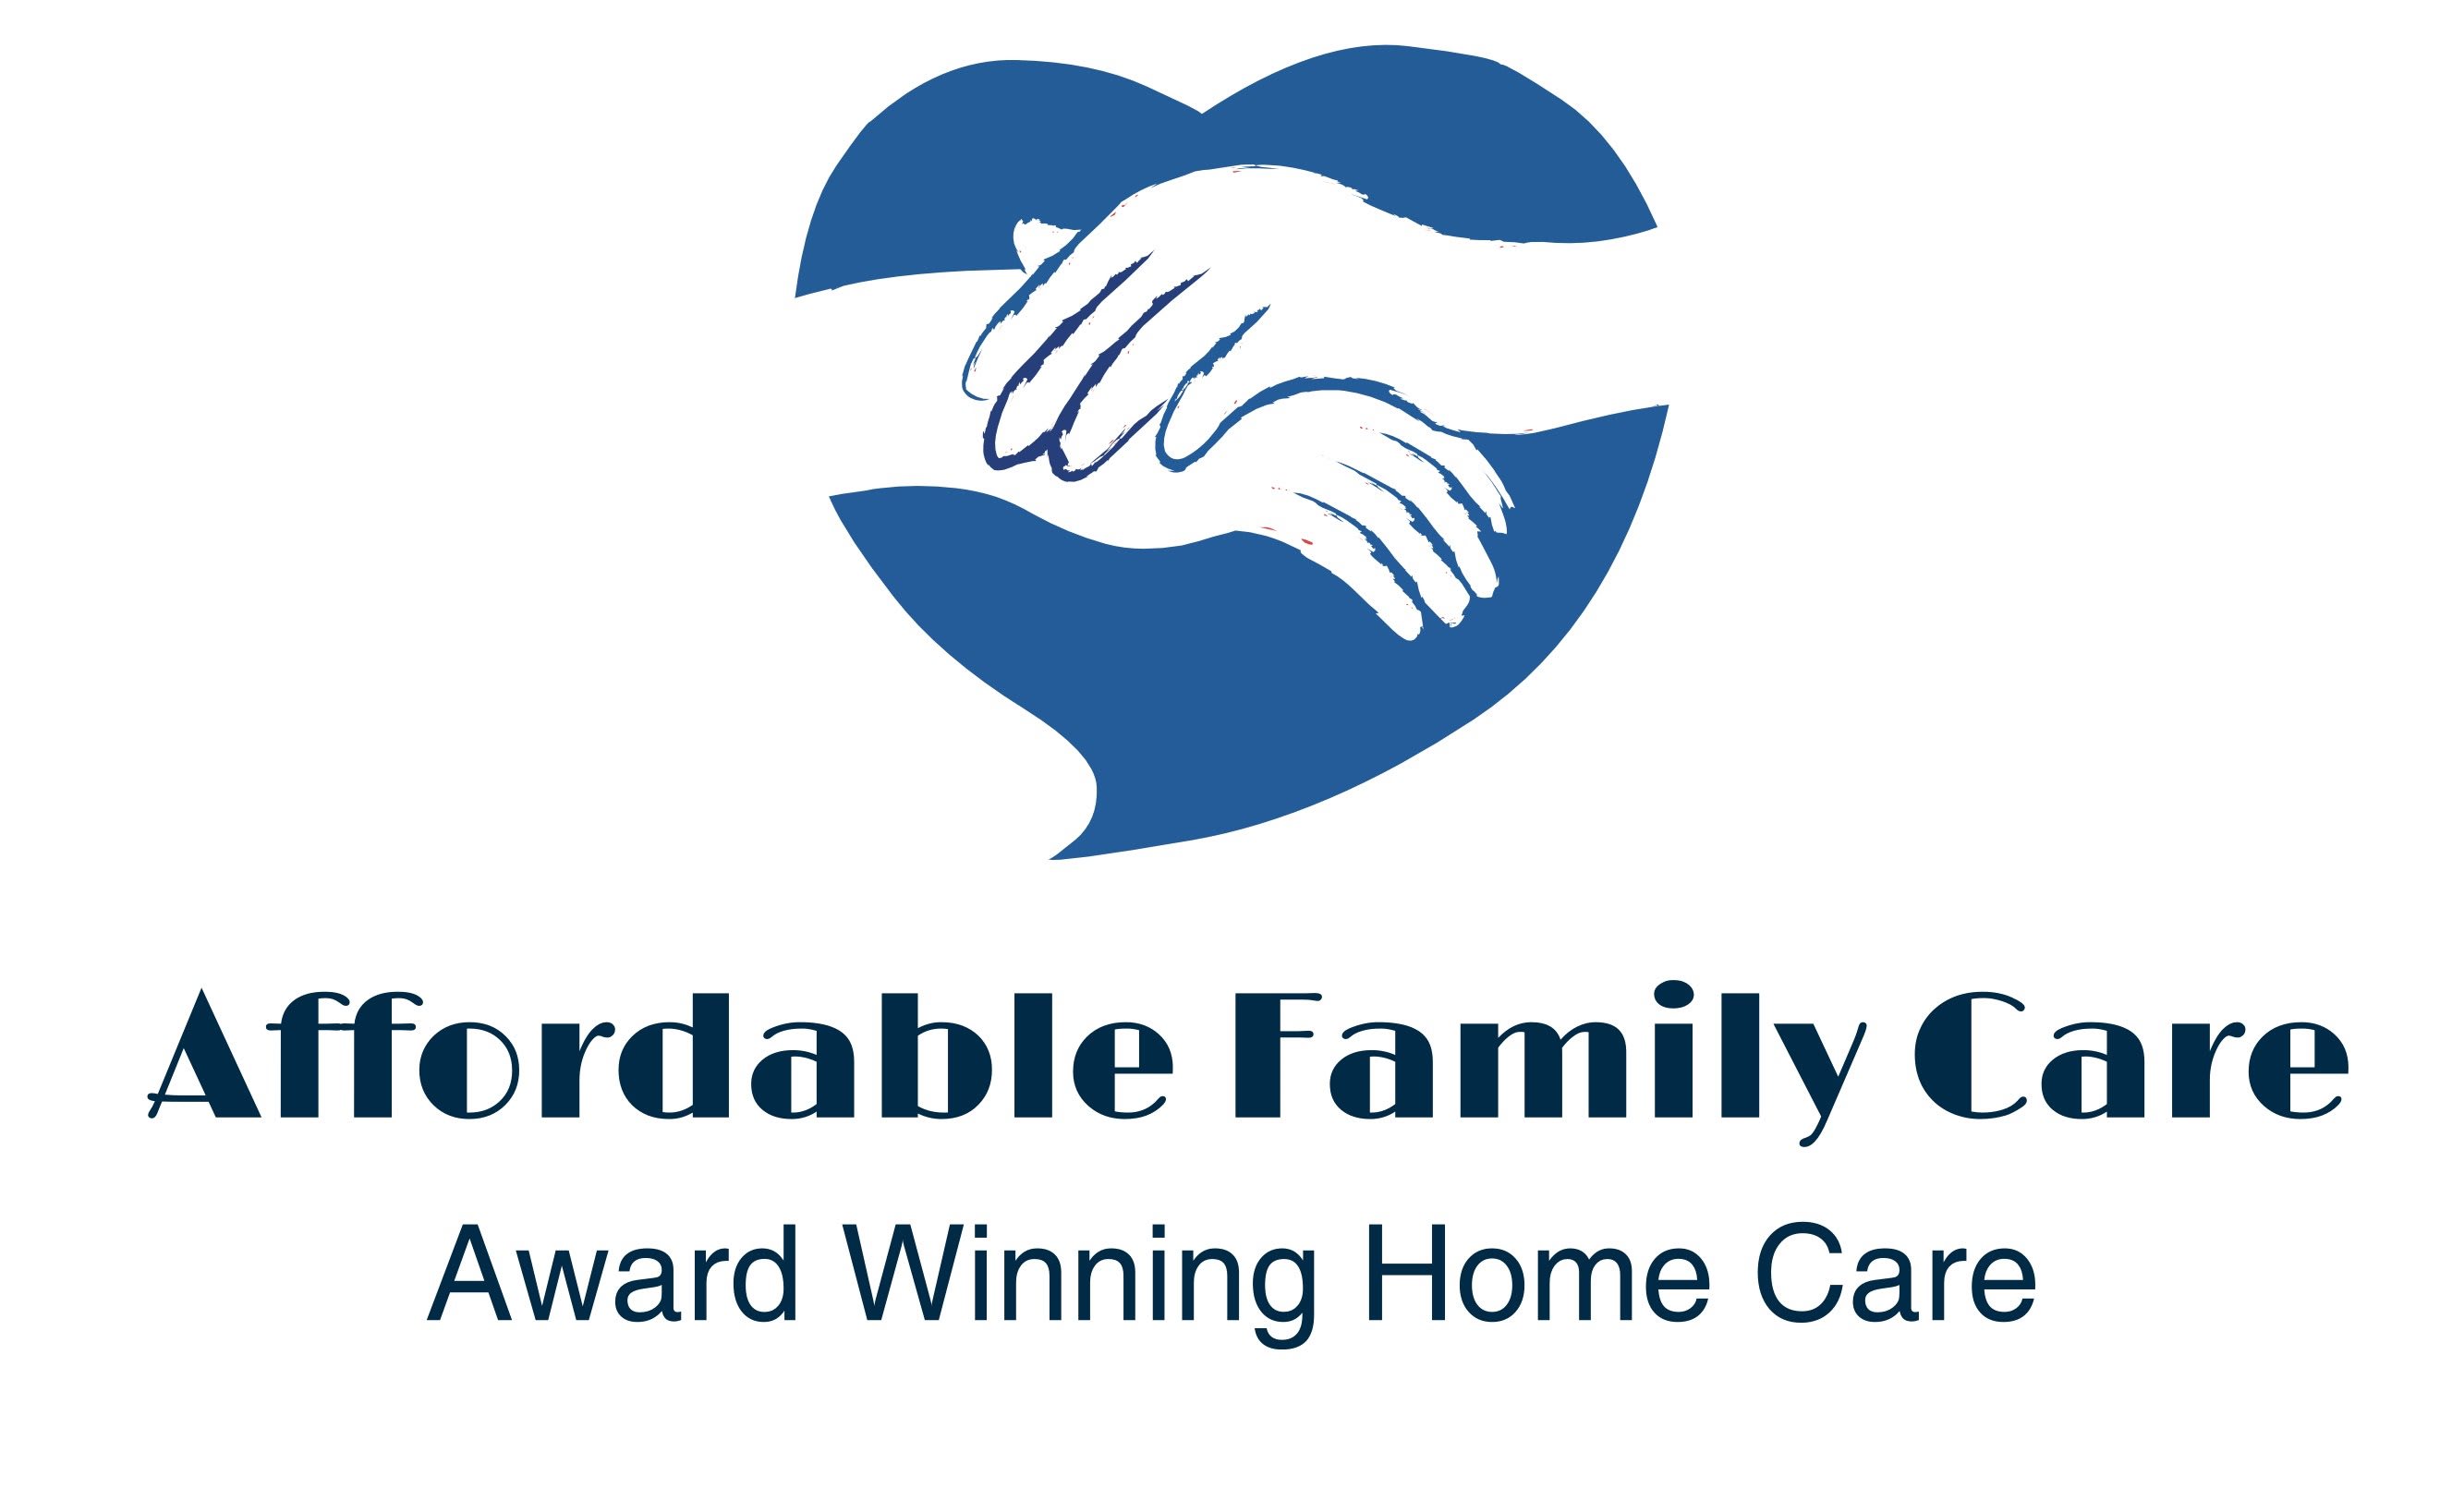 Photo of Affordable Family Care Services, Inc. - Greensboro, NC